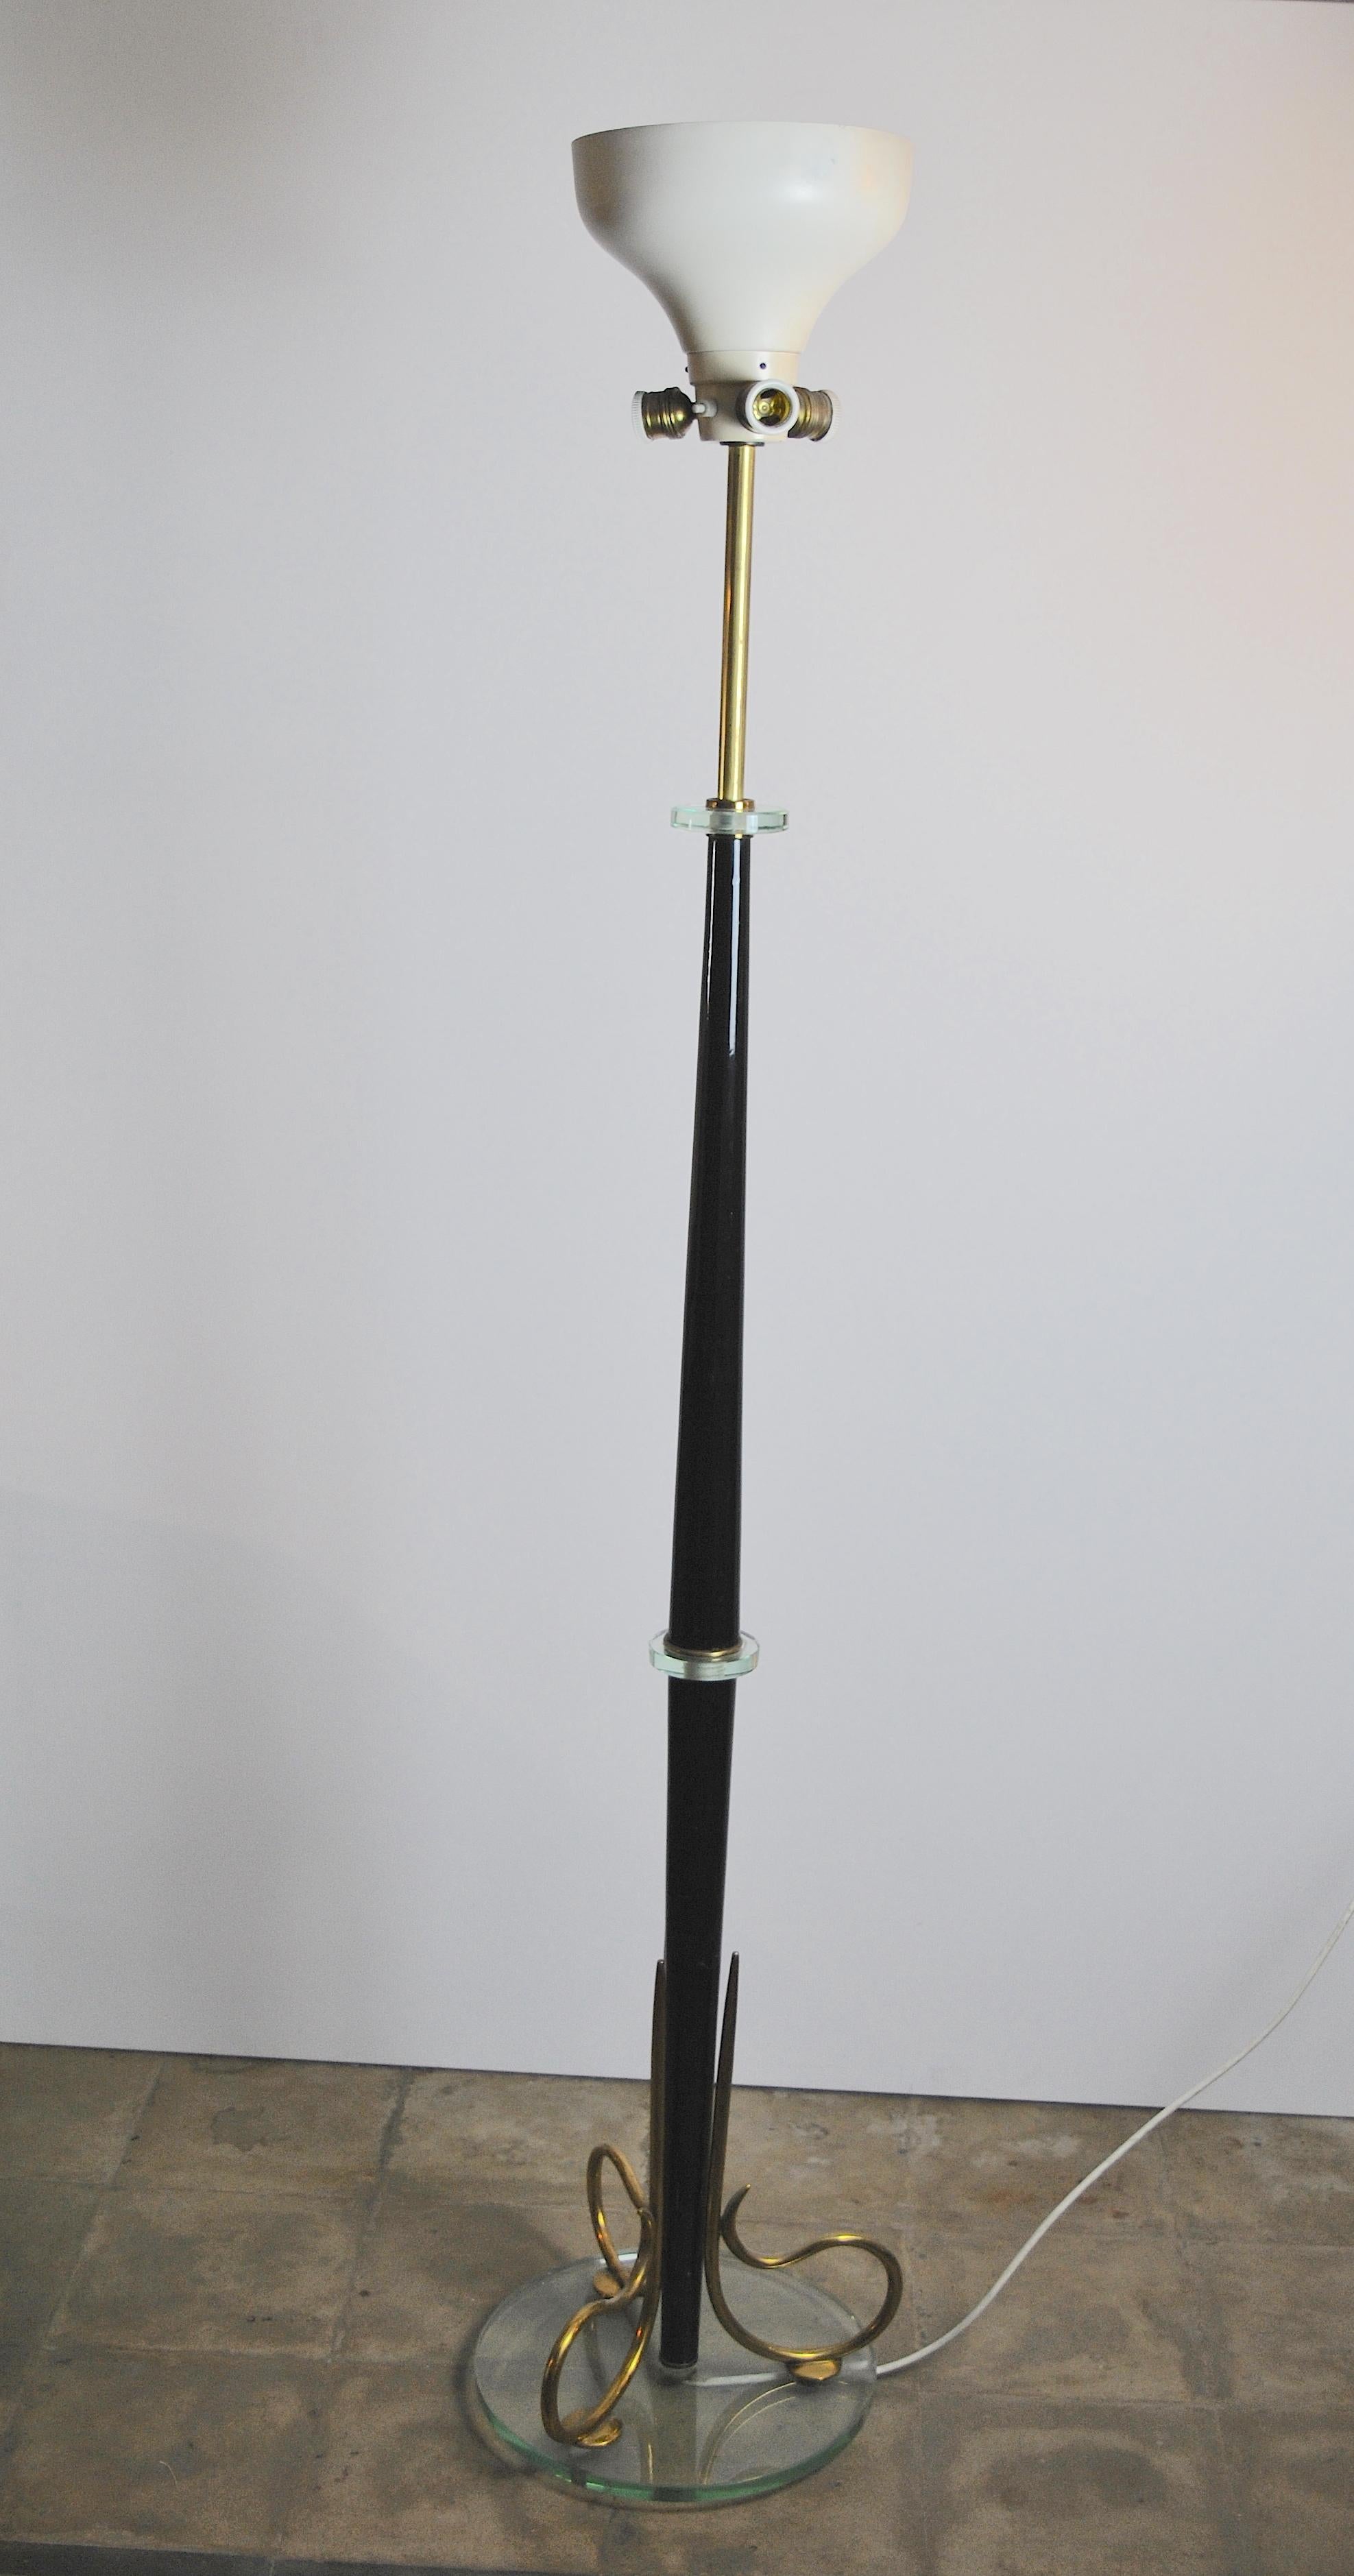 Midcentury Italian Floor Lamp in Fontana Arte Style with Brass Finishes, 1950s For Sale 5